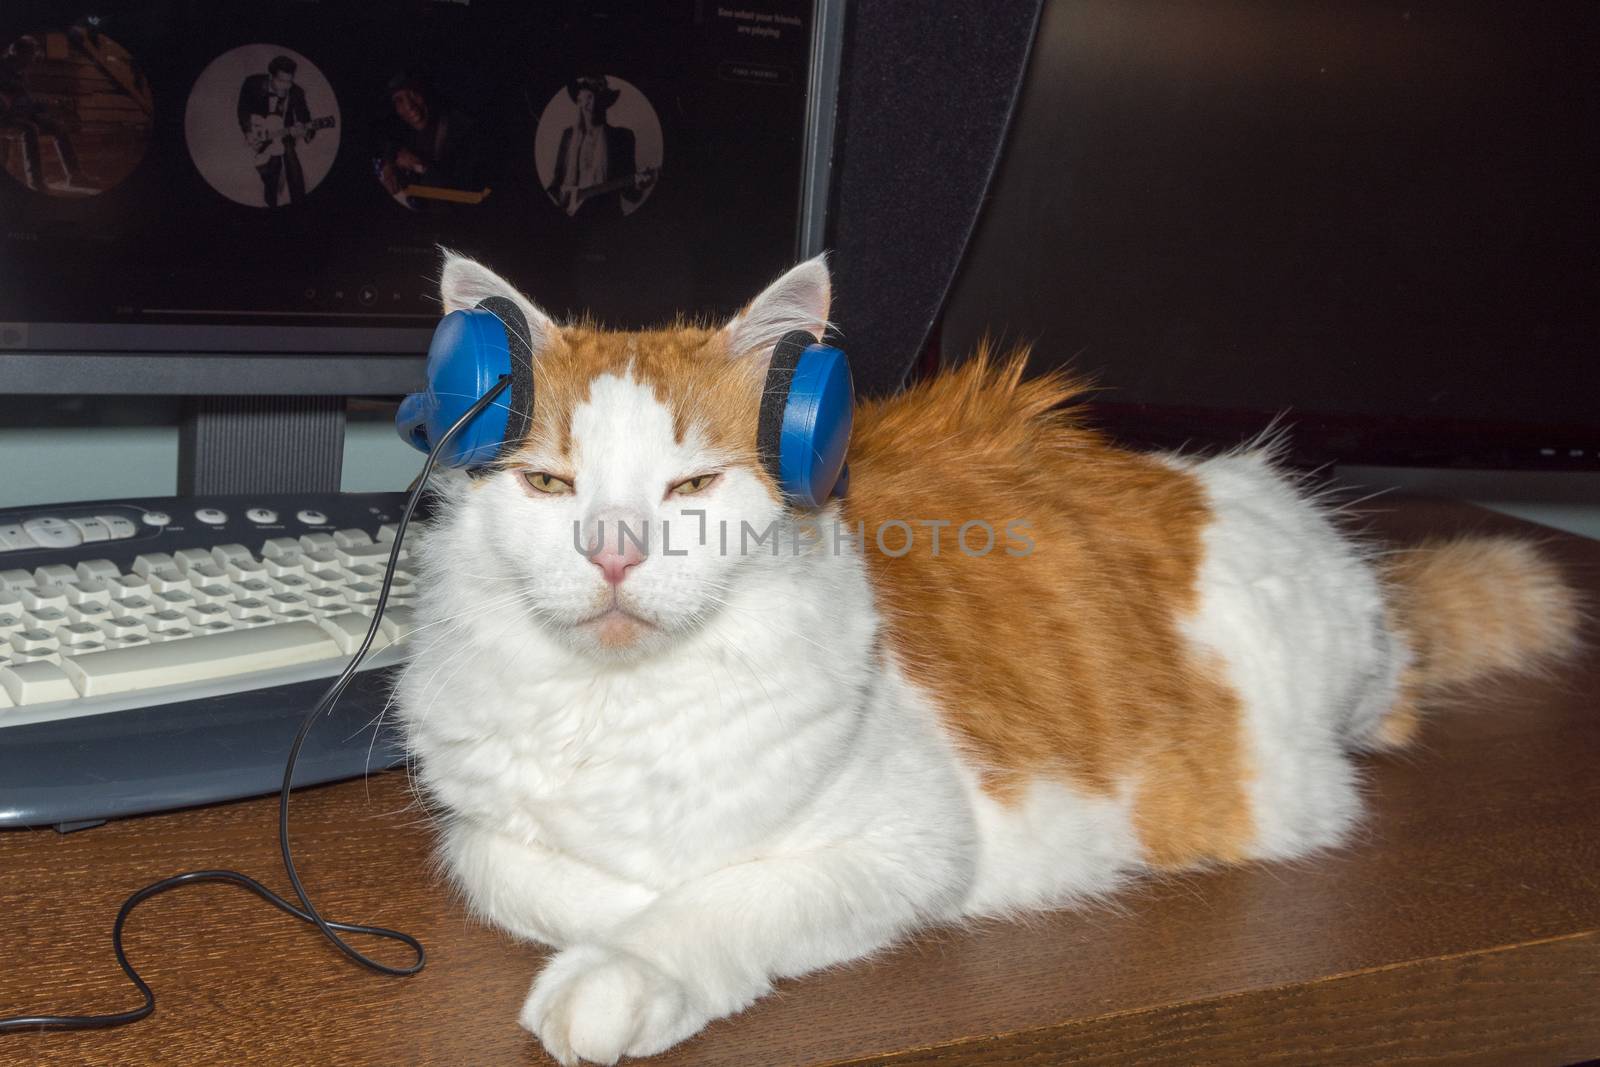 The cat listens to soft music with headphones that the master has dressed for him